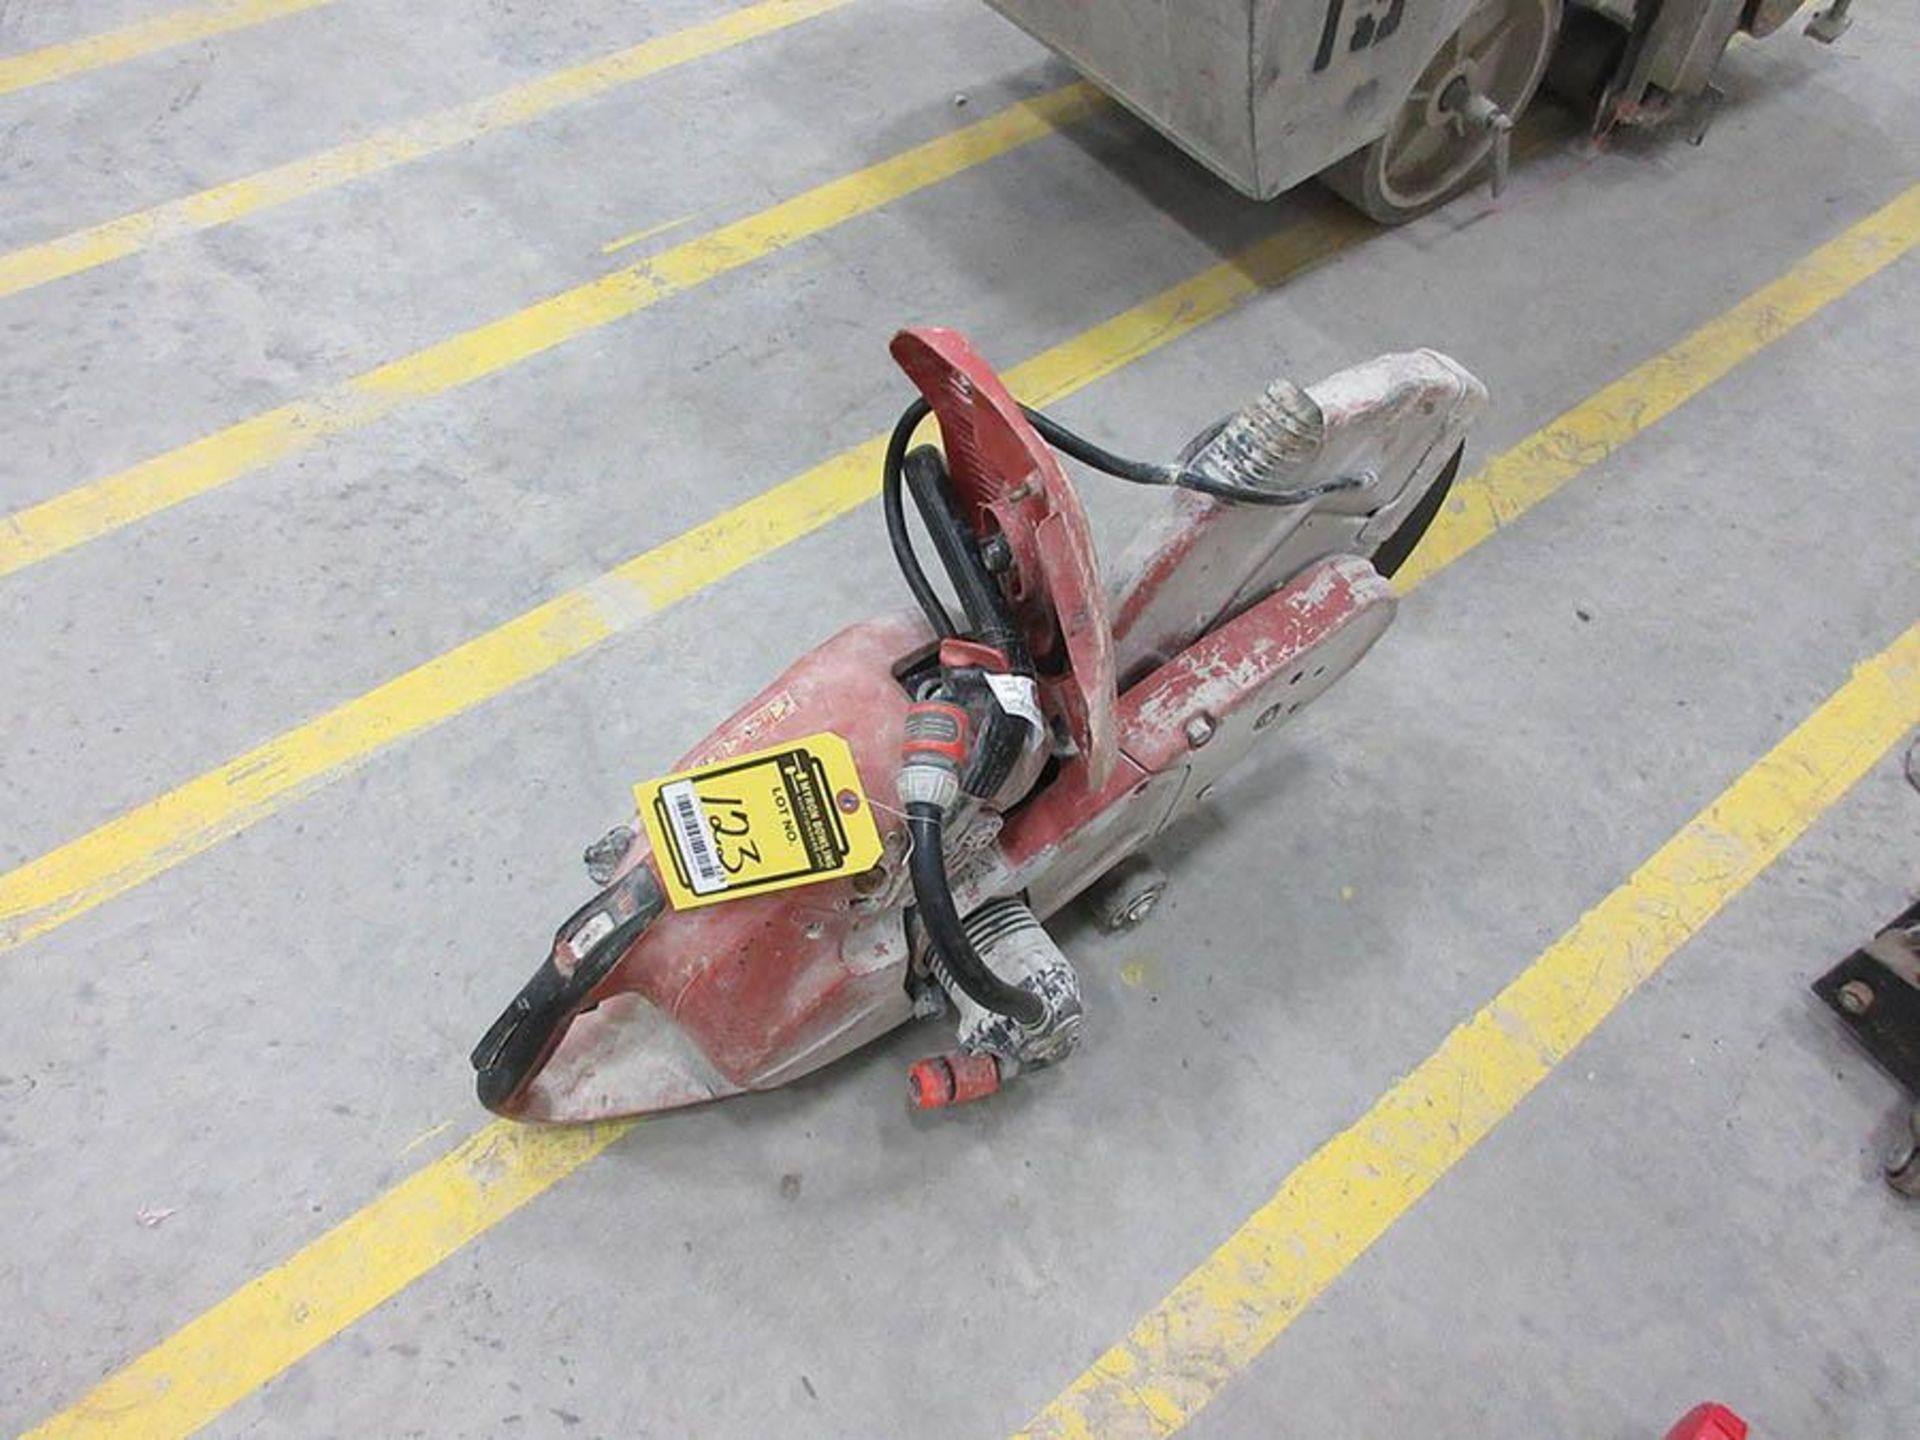 HILTI DSH700X DEMO SAW (UNKNOWN CONDITION) - Image 2 of 2